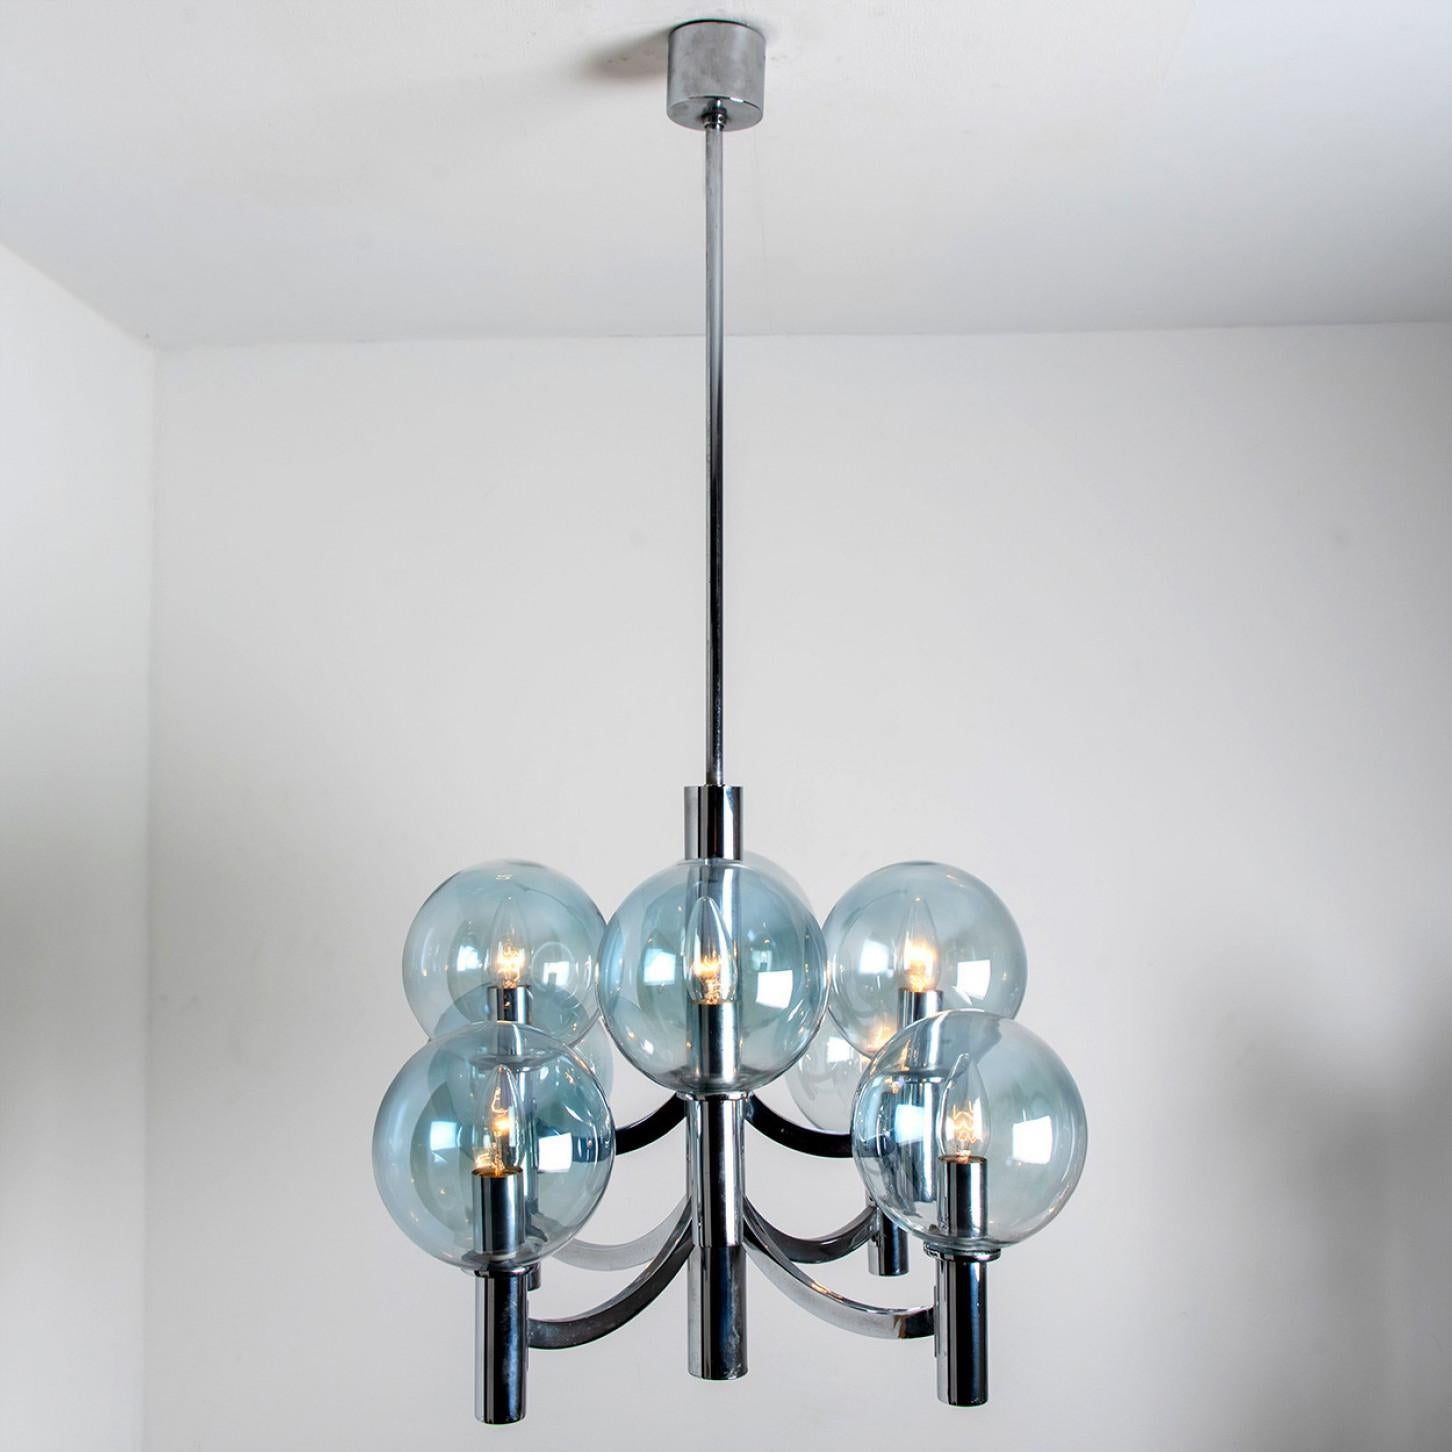 Chrome and Light Blue Glass Chandelier in the style of Arne Jakobsson, 1970s For Sale 7